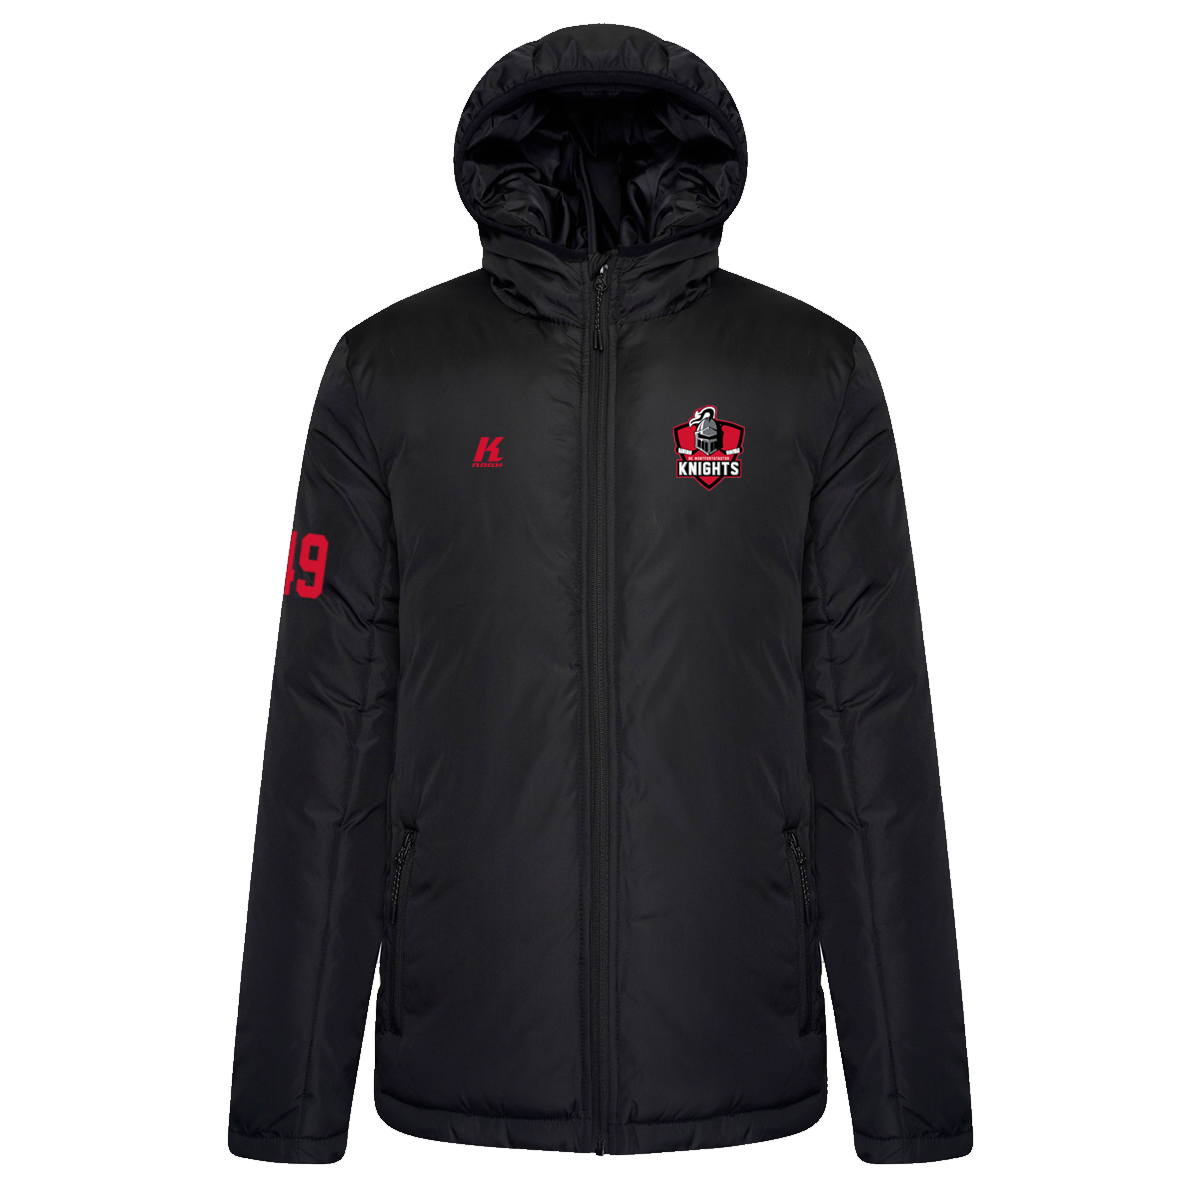 HCK Gameday Jacket with Playernumber/Initials